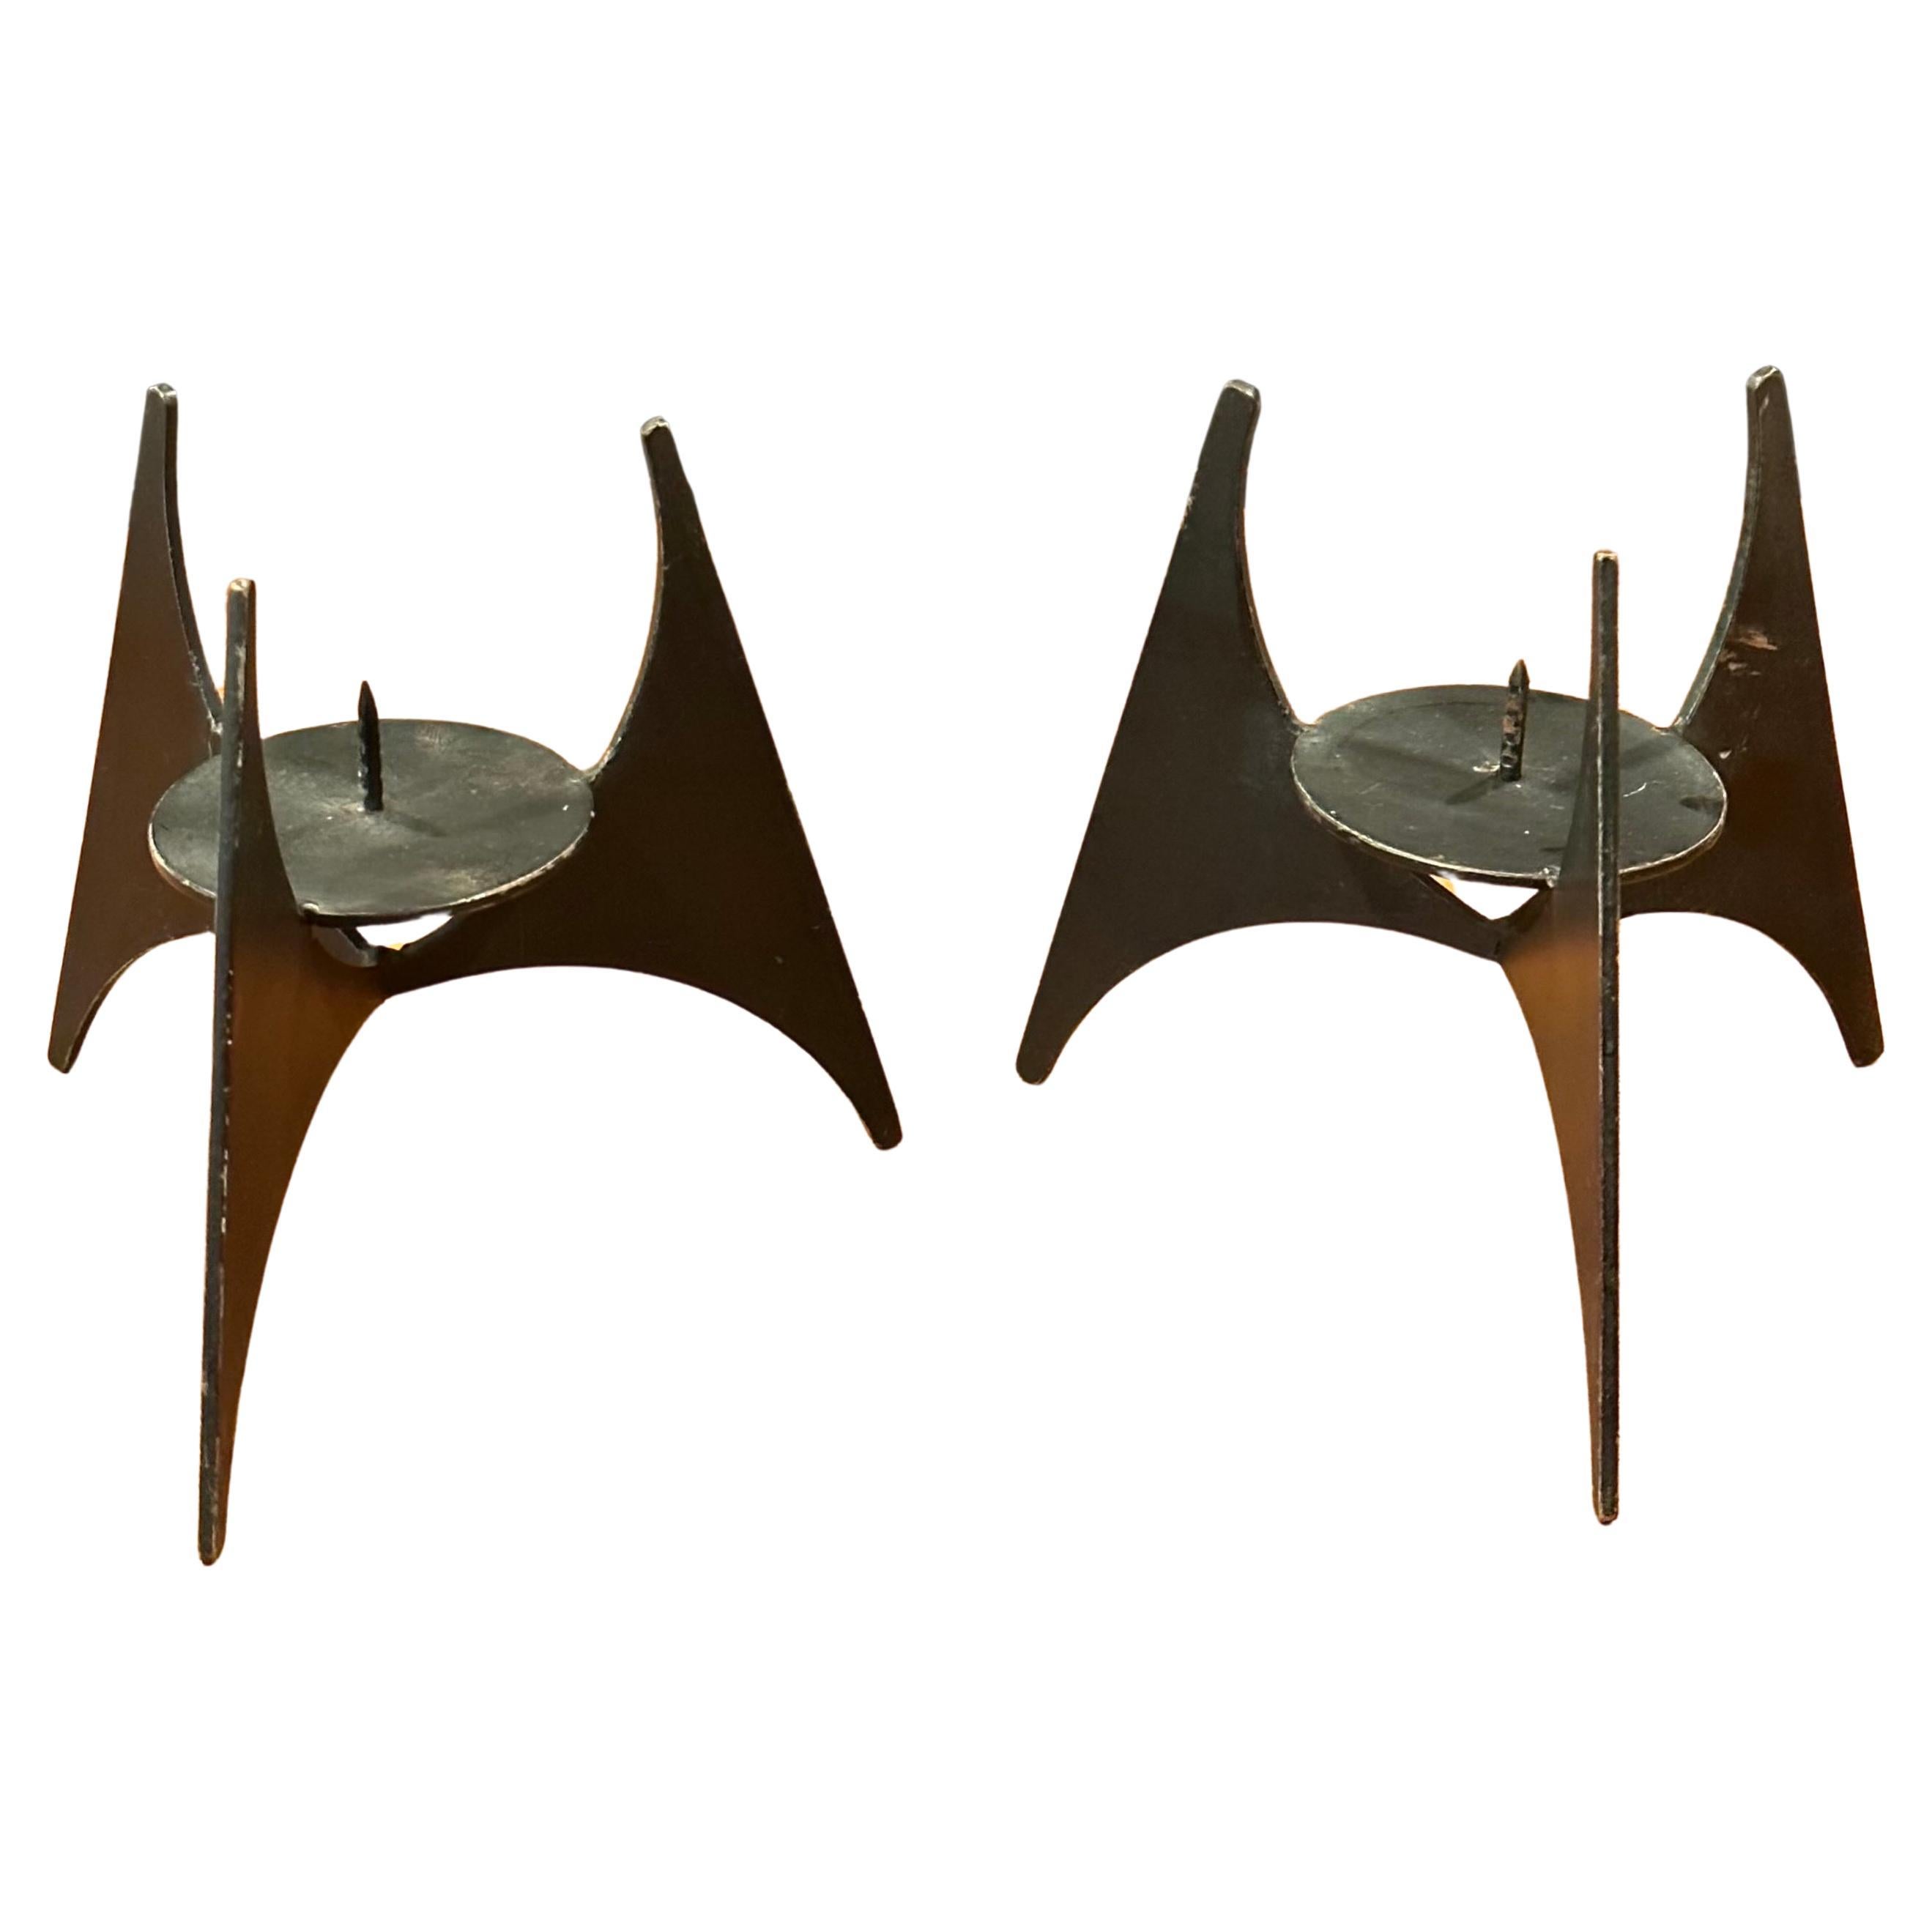 A nice pair of Modernist cut steel candle holders, circa 1970s.   The Each holder has a triangular pyramid form supported by a tripod base and supprts up to a 3